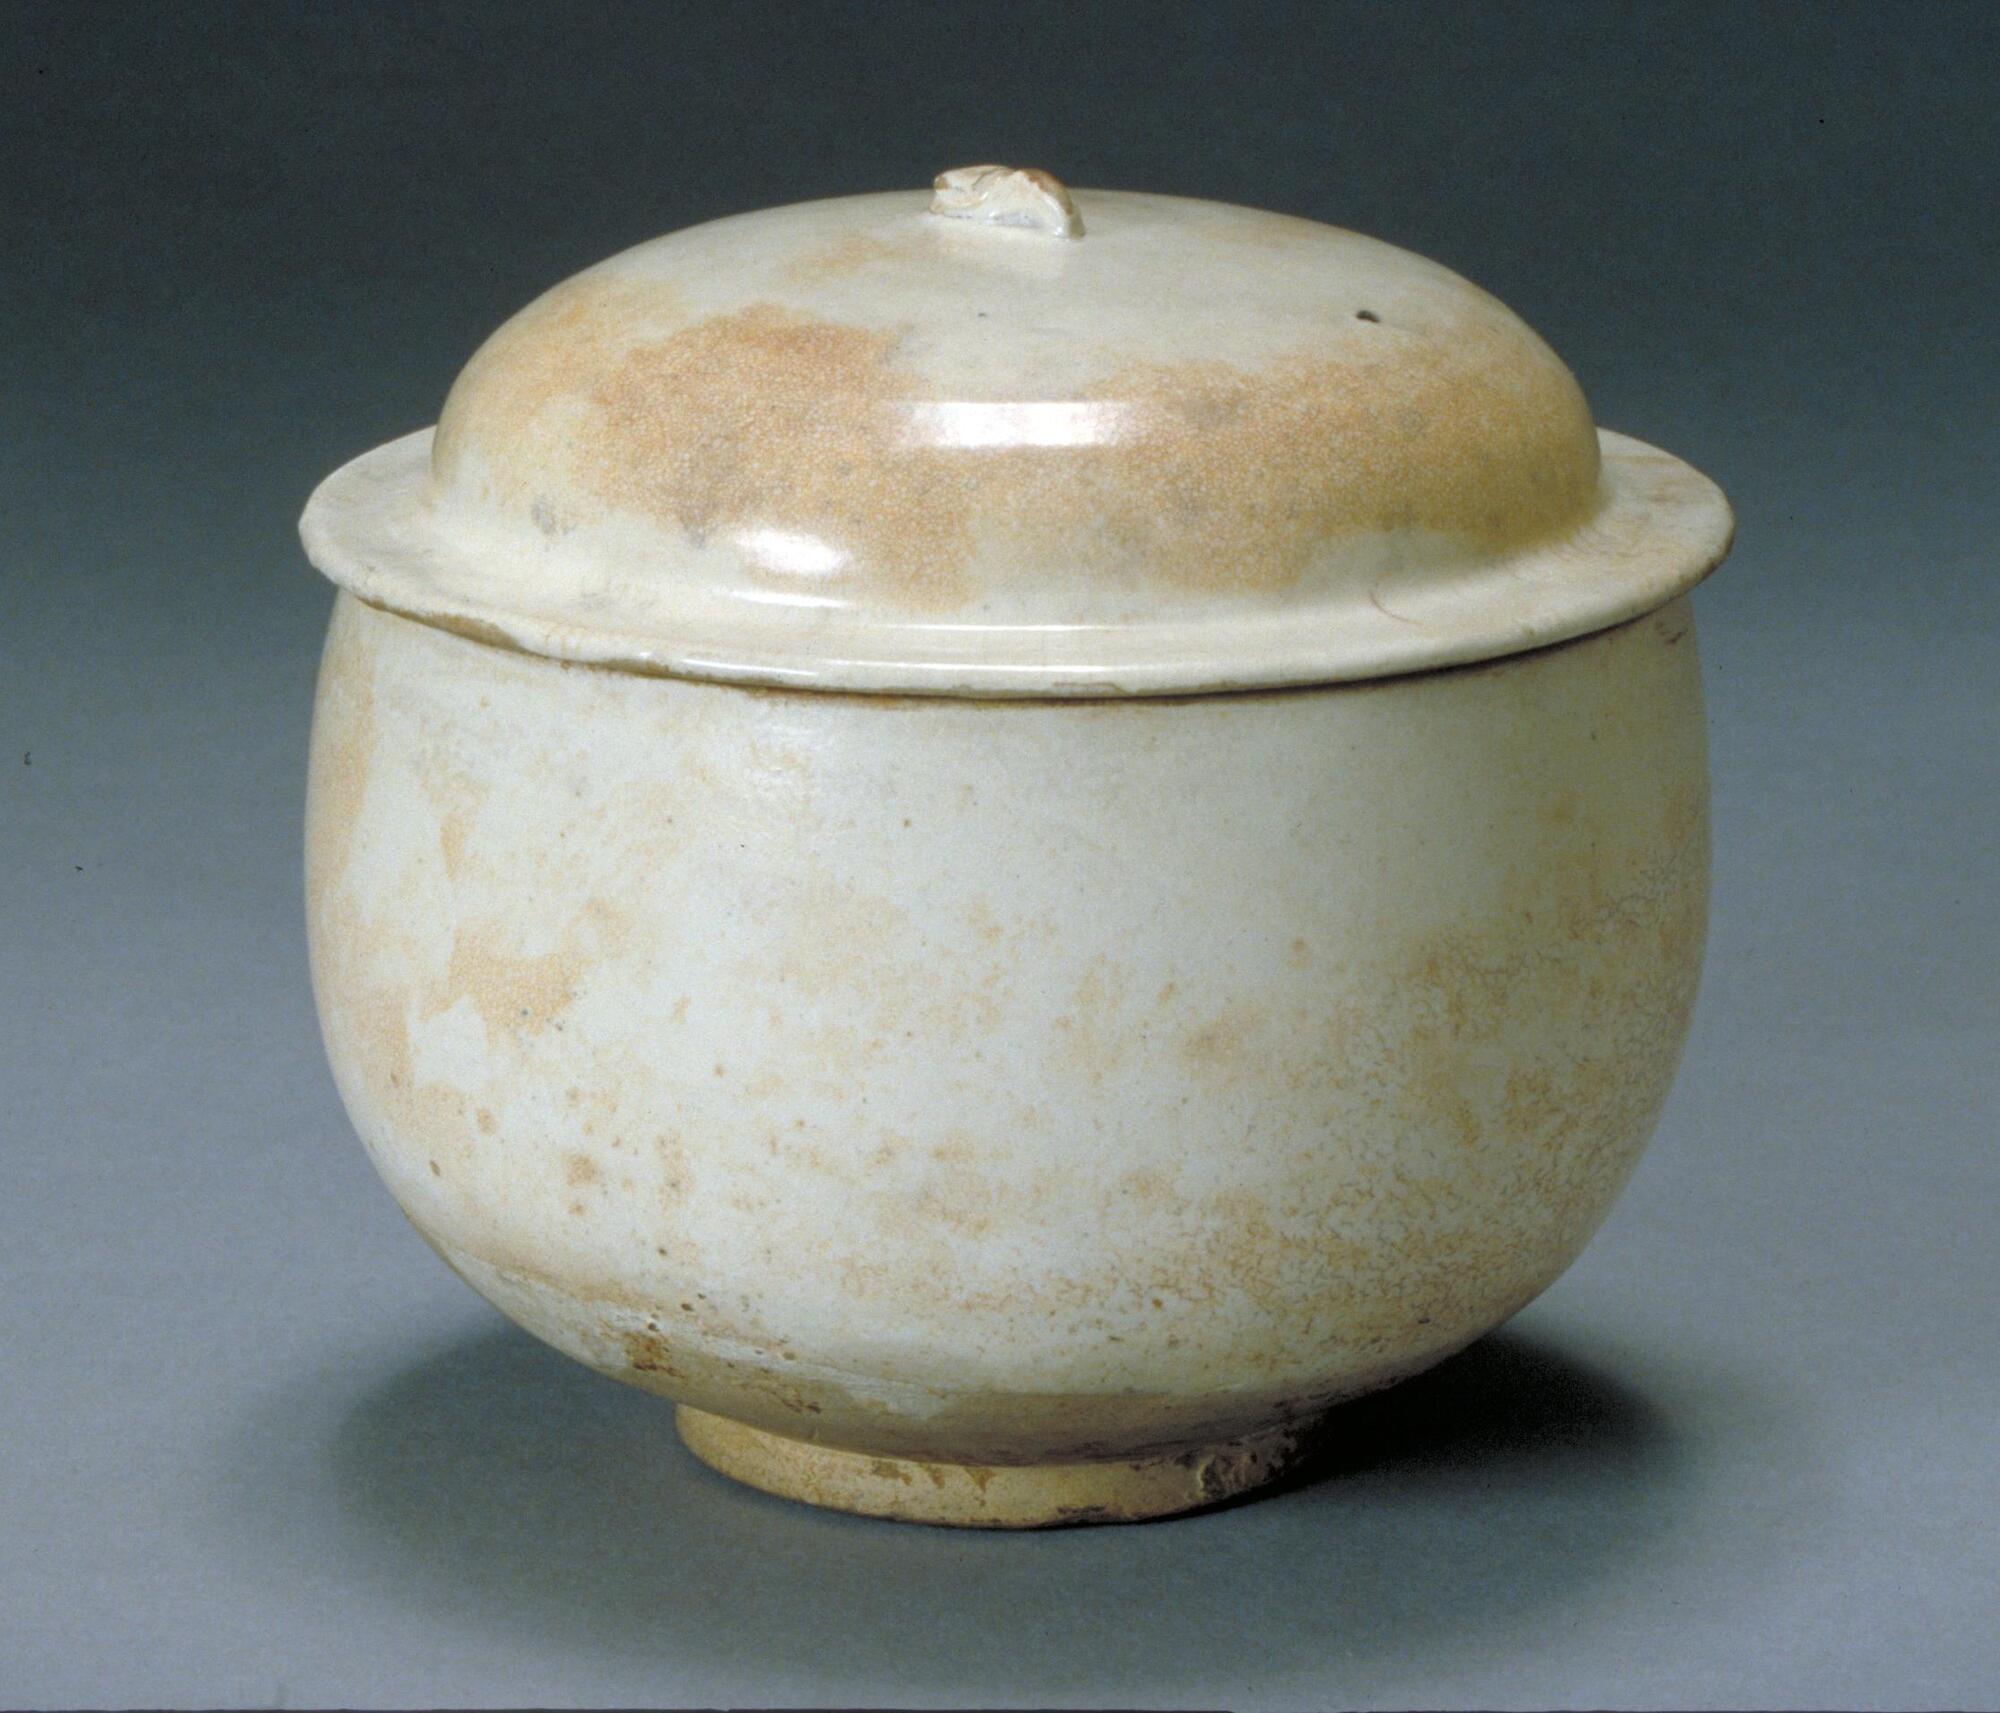 A tall, round bowl with a foot at the bottom and a lid that starts out flat but then becomes a rounded top. It is white with some yellow coloring.